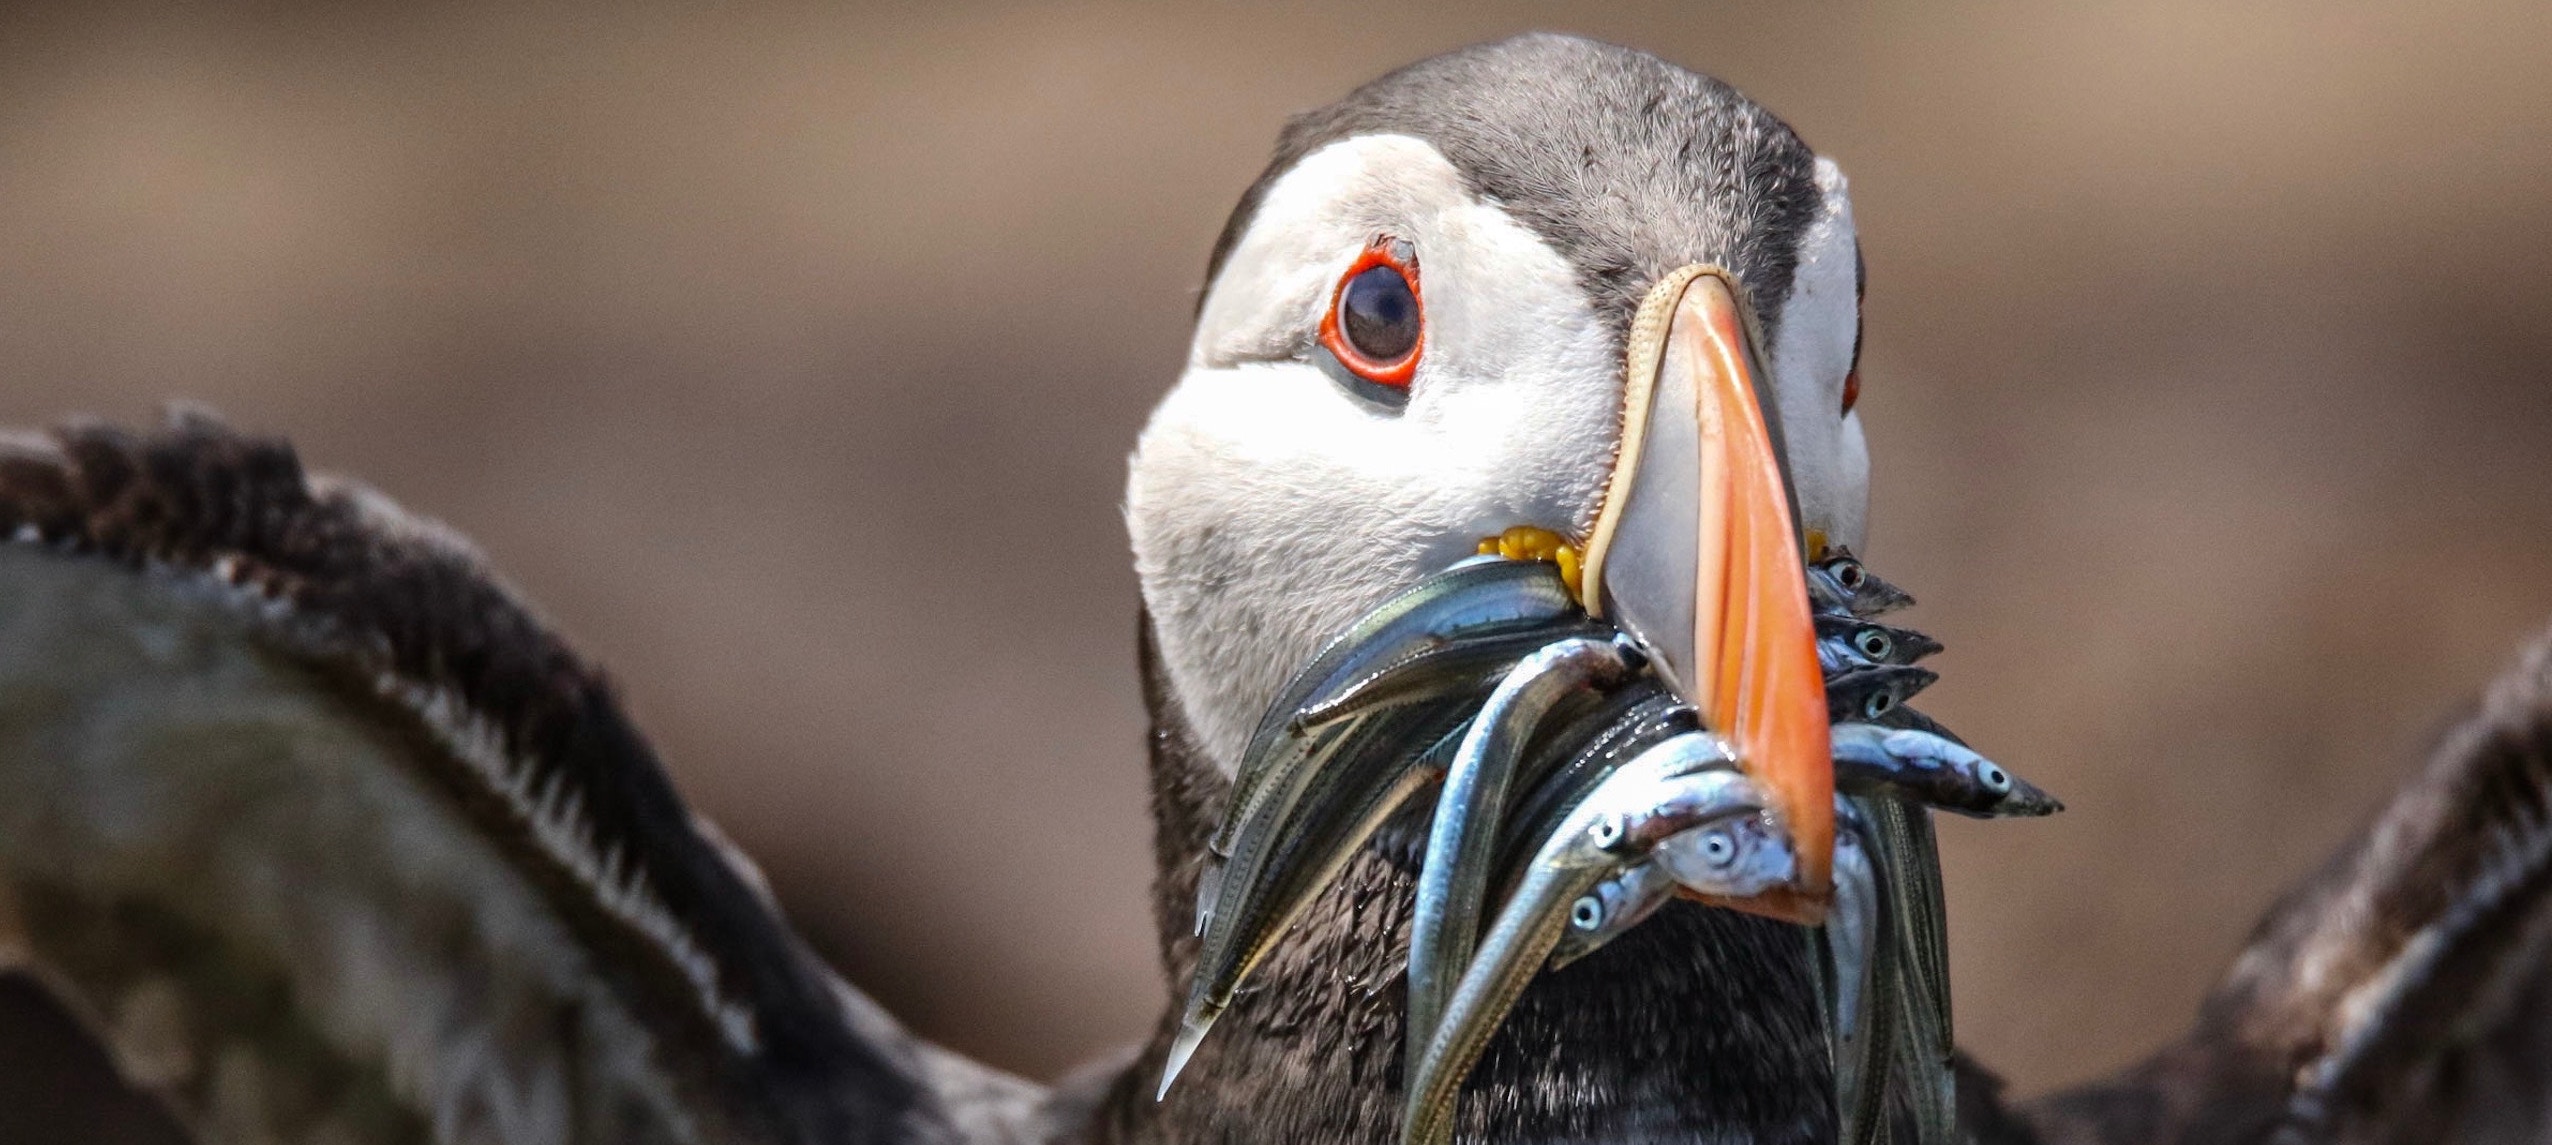 image of puffin